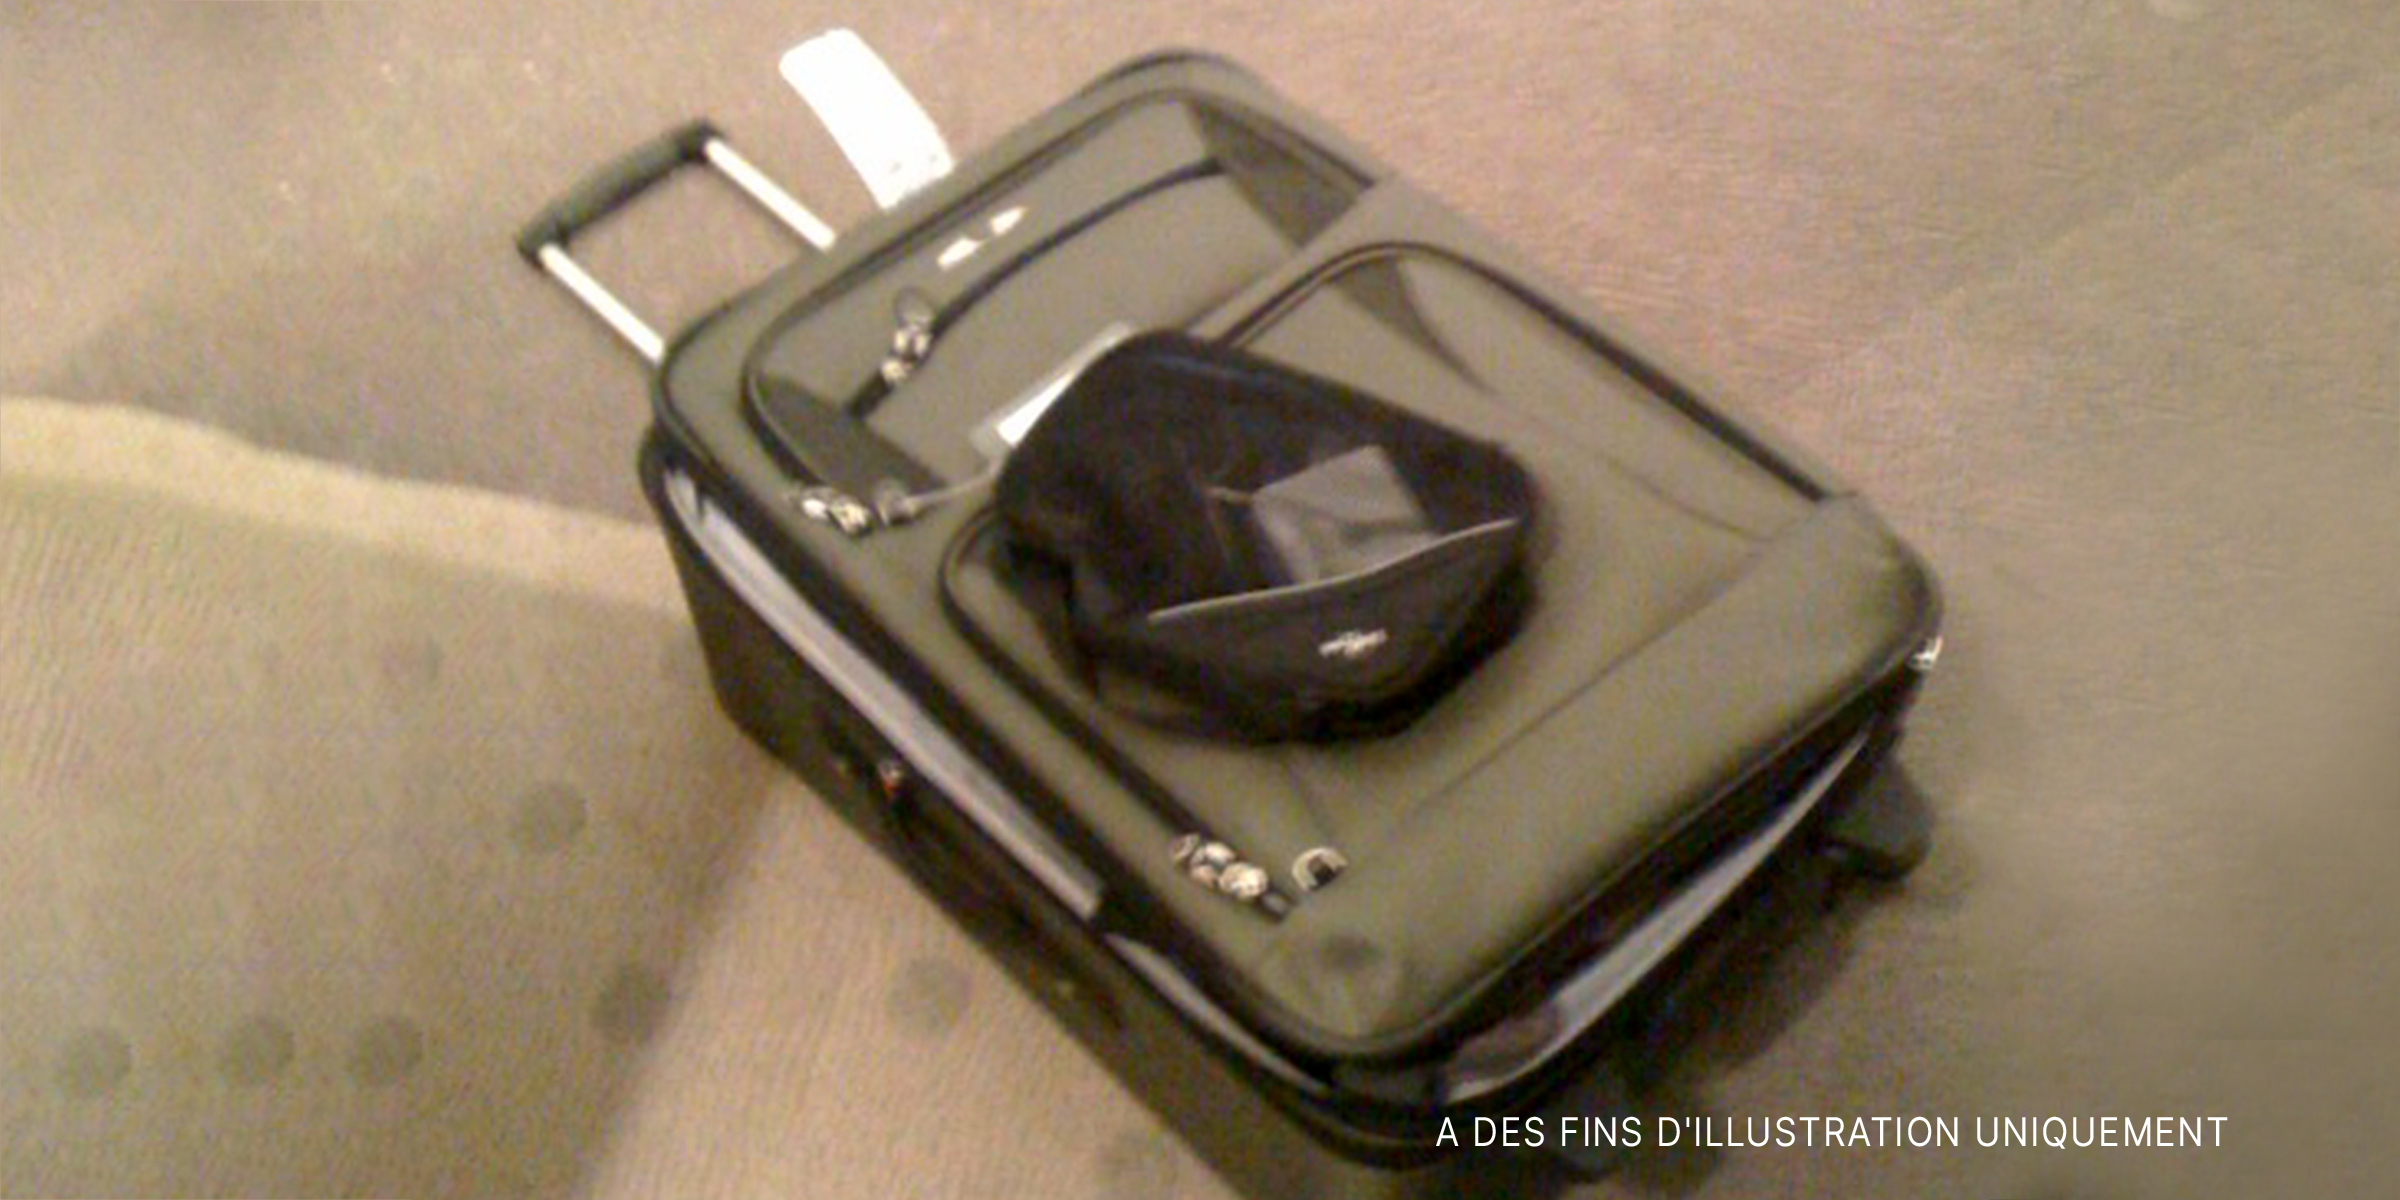 Une valise | Source : flickr.com/twid/CC BY-SA 2.0